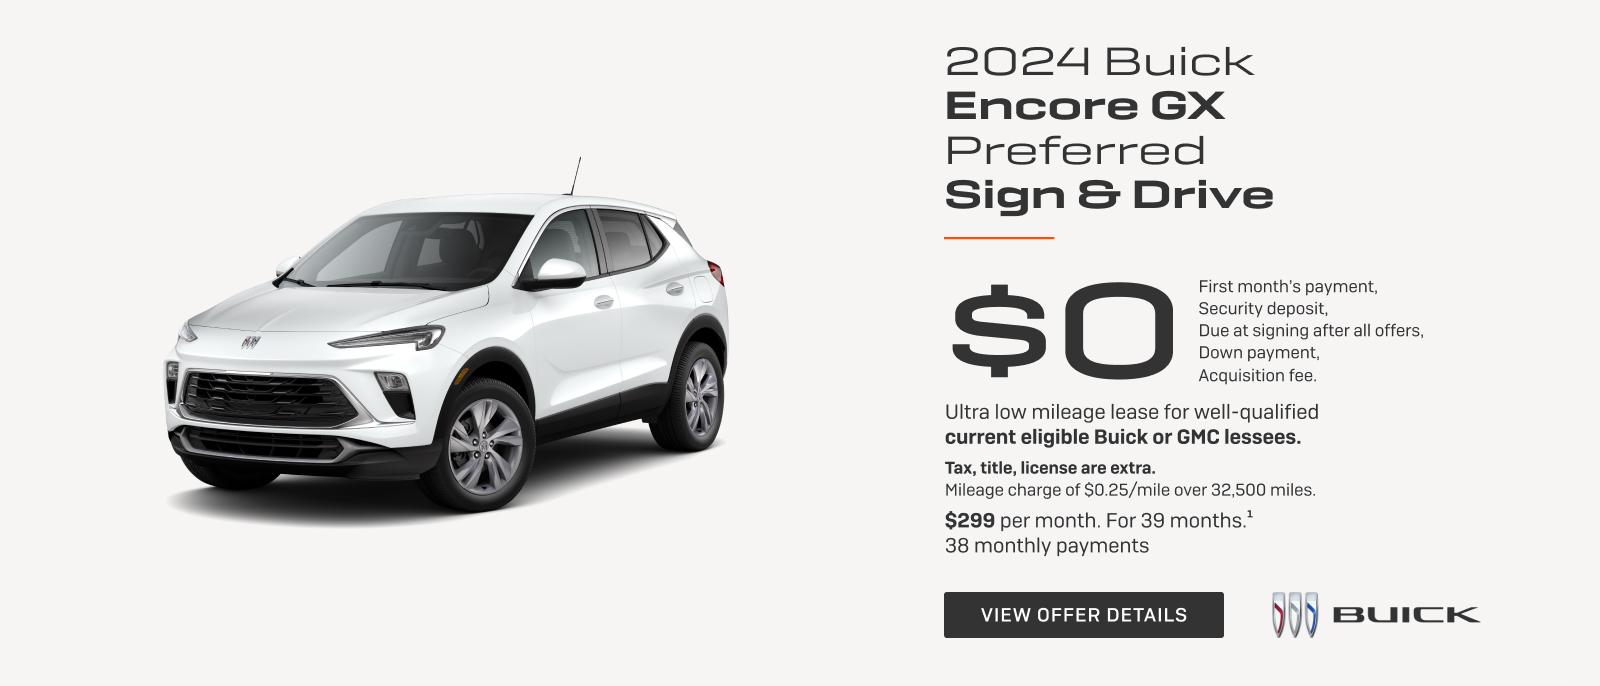 SIGN & DRIVE

$0
FIRST MONTH'S PAYMENT
SECURITY DEPOSIT
DUE AT LEASE SIGNING AFTER ALL OFFERS
DOWN PAYMENT
ACQUISITION FEE

Ultra low mileage lease for well-qualified current eligible Buick or GMC lessees.

Tax, title, license are extra. Mileage charge of $0.25/mile over 32,500 miles.

$299 per month. For 39 months.1
38 monthly payments